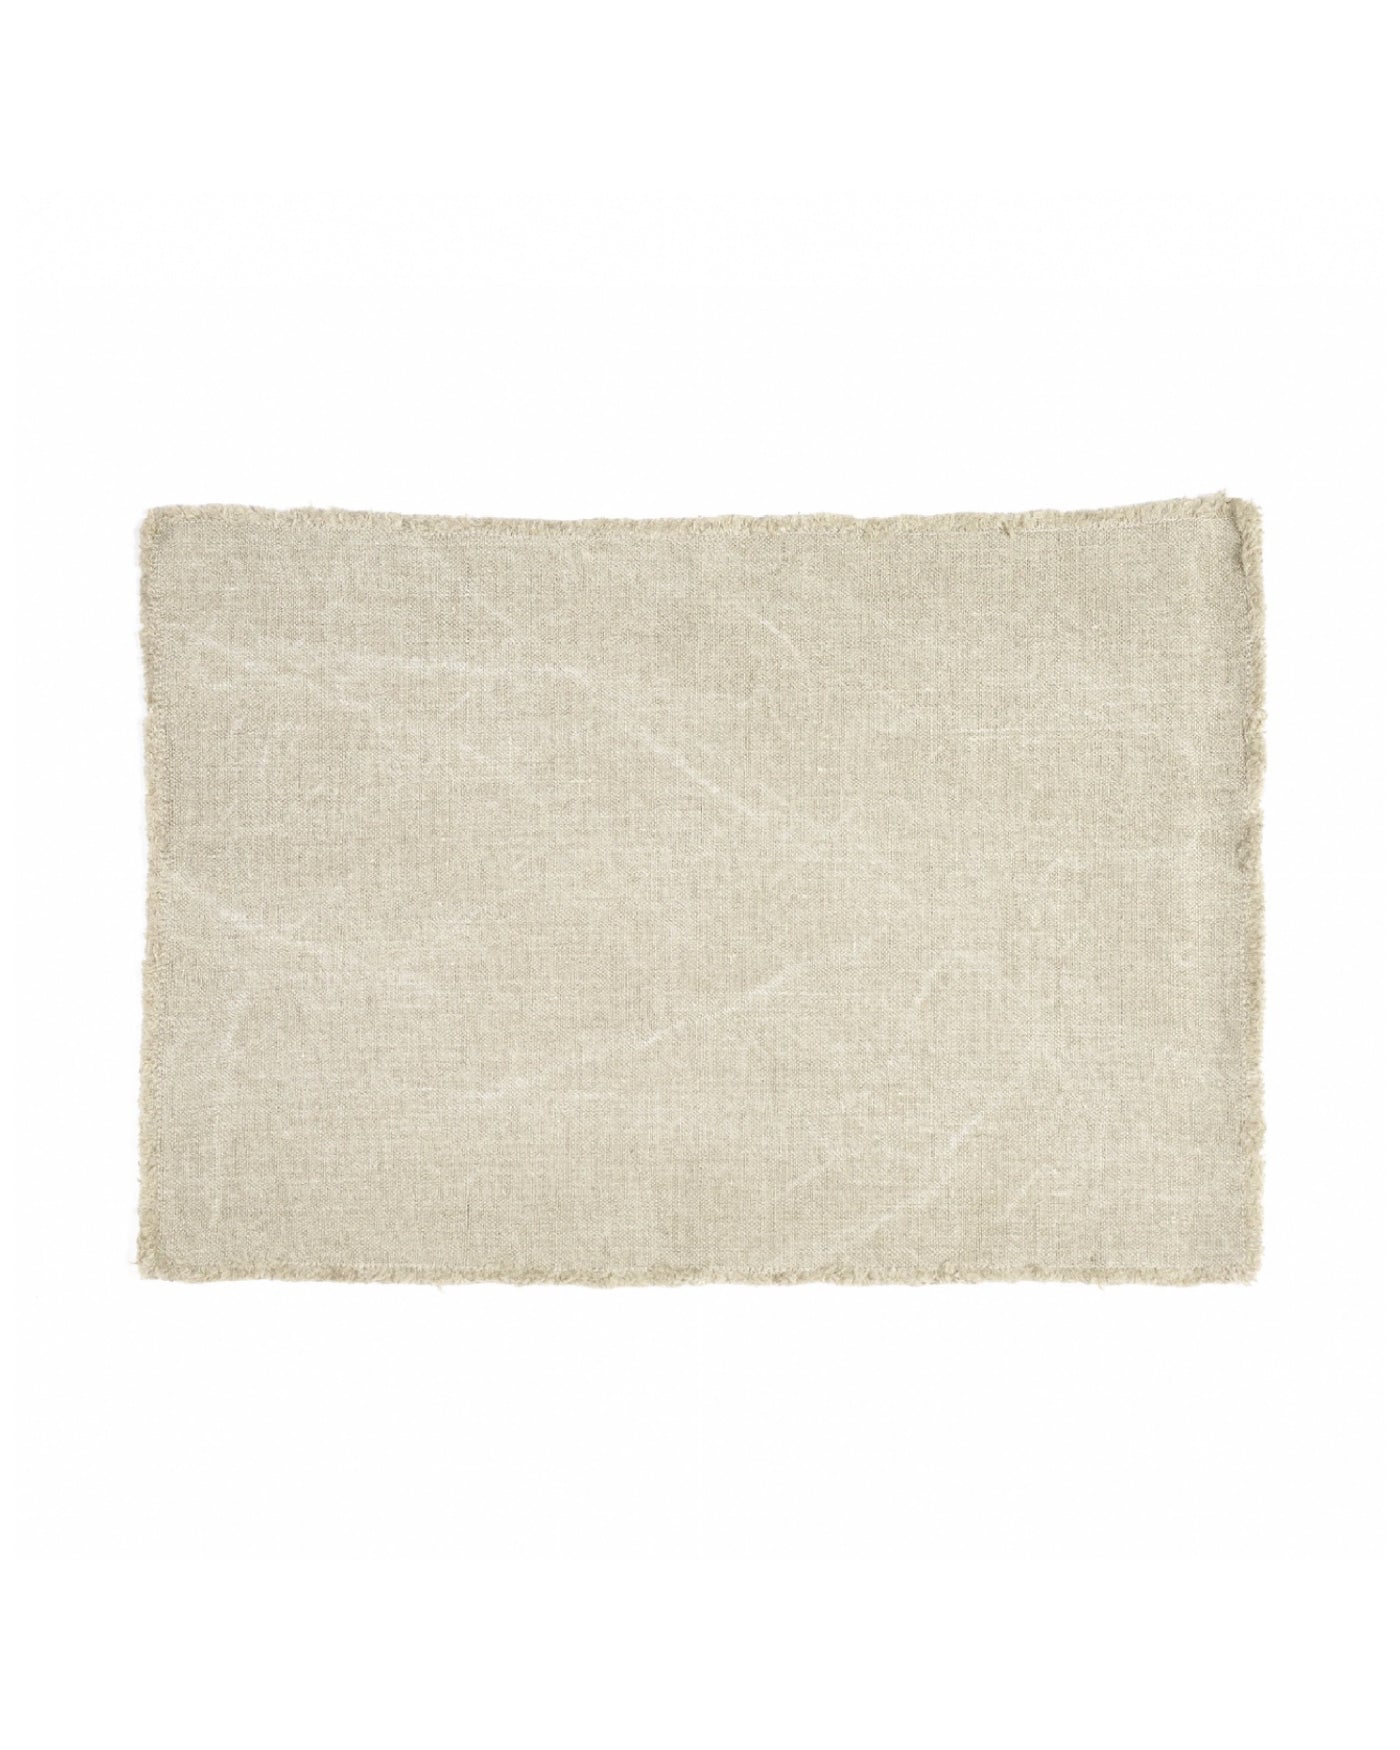 Placemat Pacific, Flax